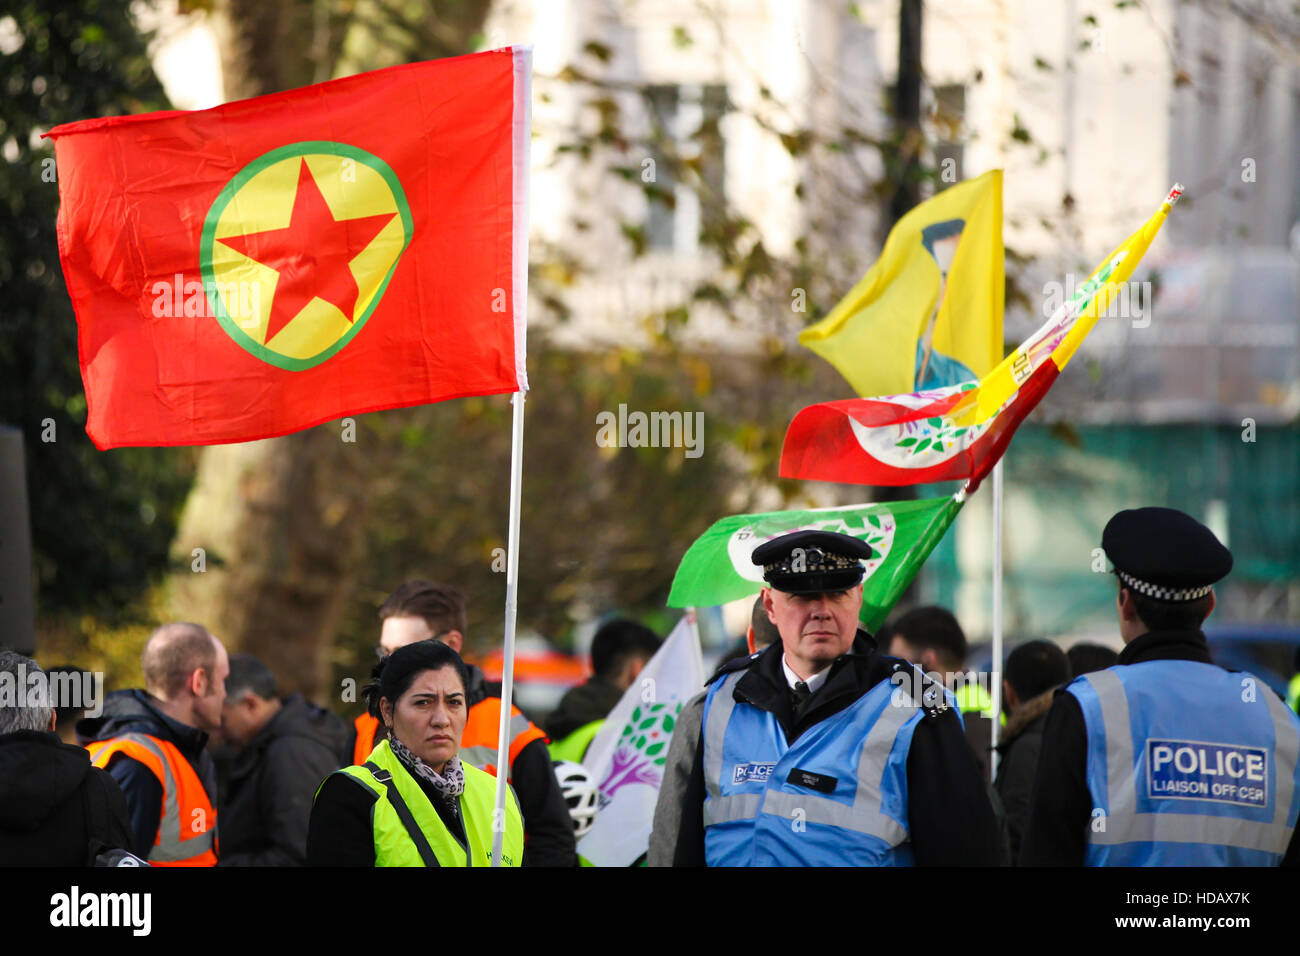 Turkish Embassy , London, UK 11 Dec 2016 - Hundreds of Kurdish protesters and their supporters demonstrate outside Turkish Embassy in London against Turkish government's repression on Kurds and demand the release of two joined leaders of Turkey's pro-Kurdish People's Democratic Party (HDP) and MPs and political prisoners in Turkey. Credit:  Dinendra Haria/Alamy Live News Stock Photo